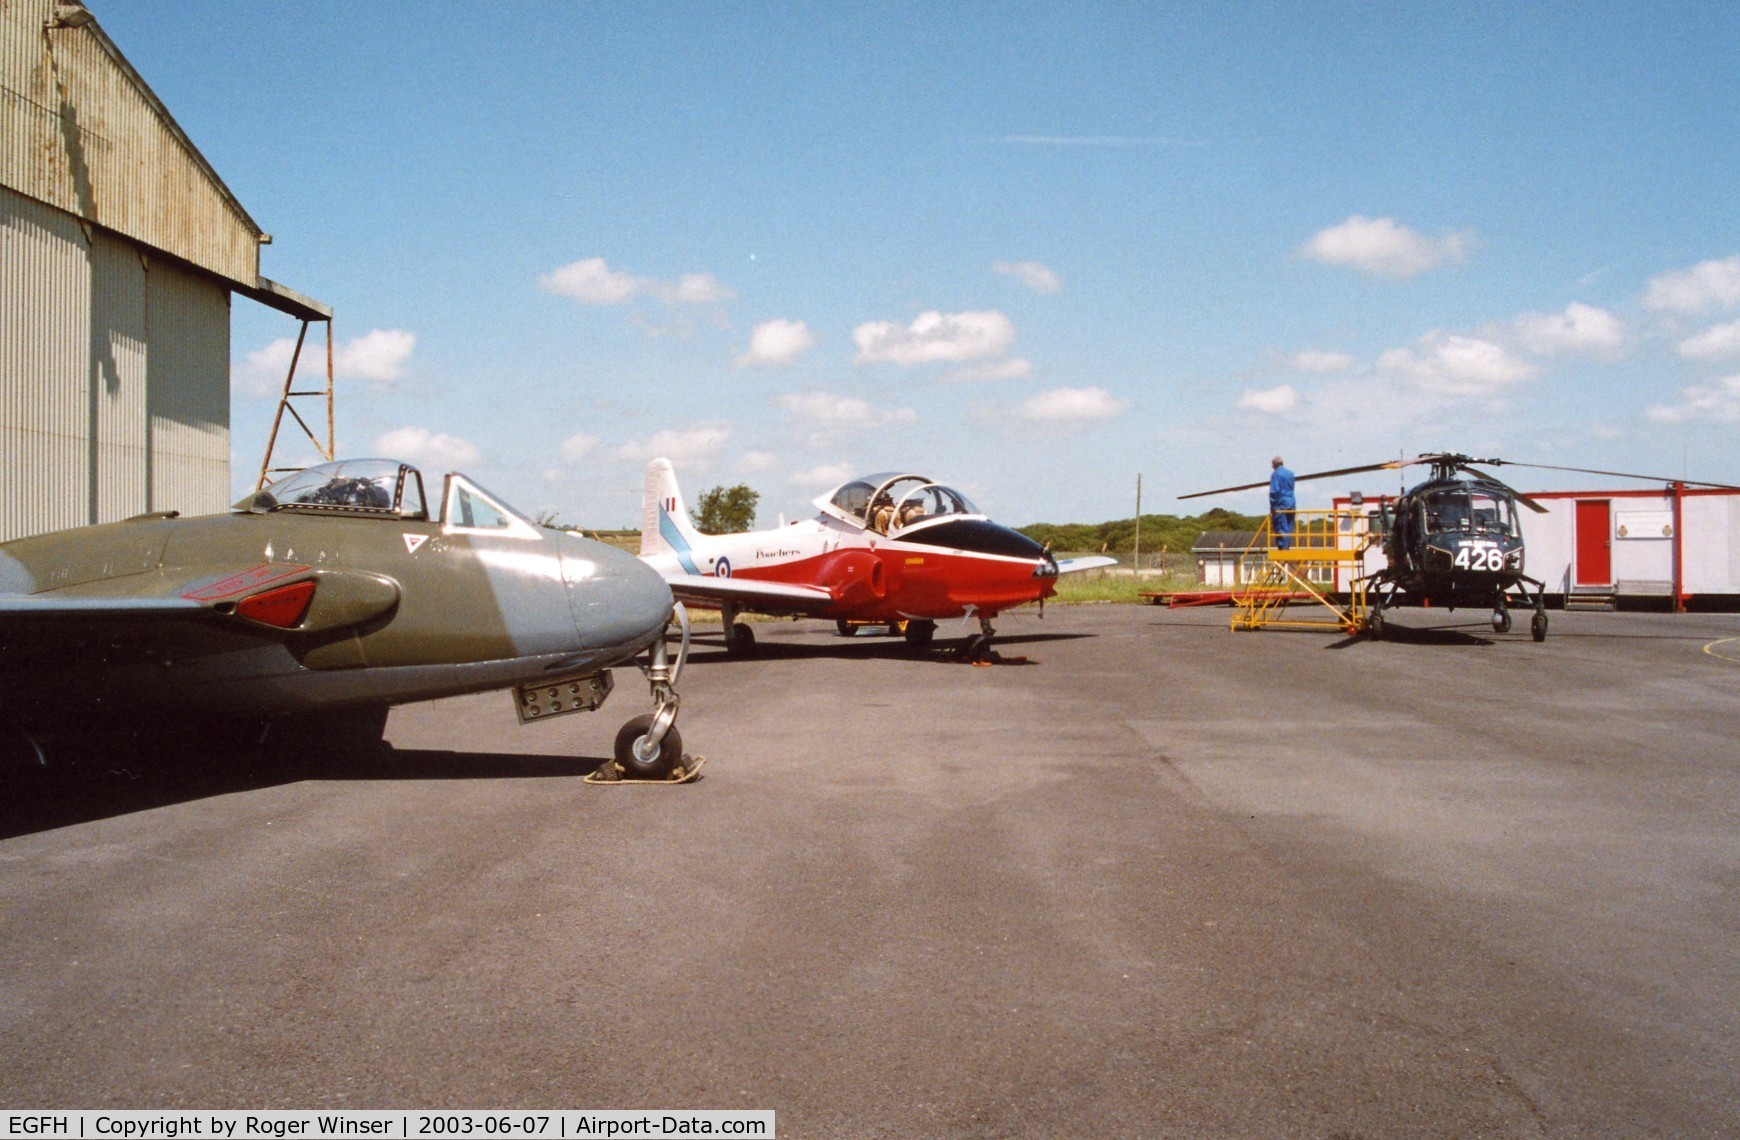 Swansea Airport, Swansea, Wales United Kingdom (EGFH) - Roll out of Gower Jets aircraft, Venom G-GONE, Jet Provost G-JPTV and Wasp G-KAWW